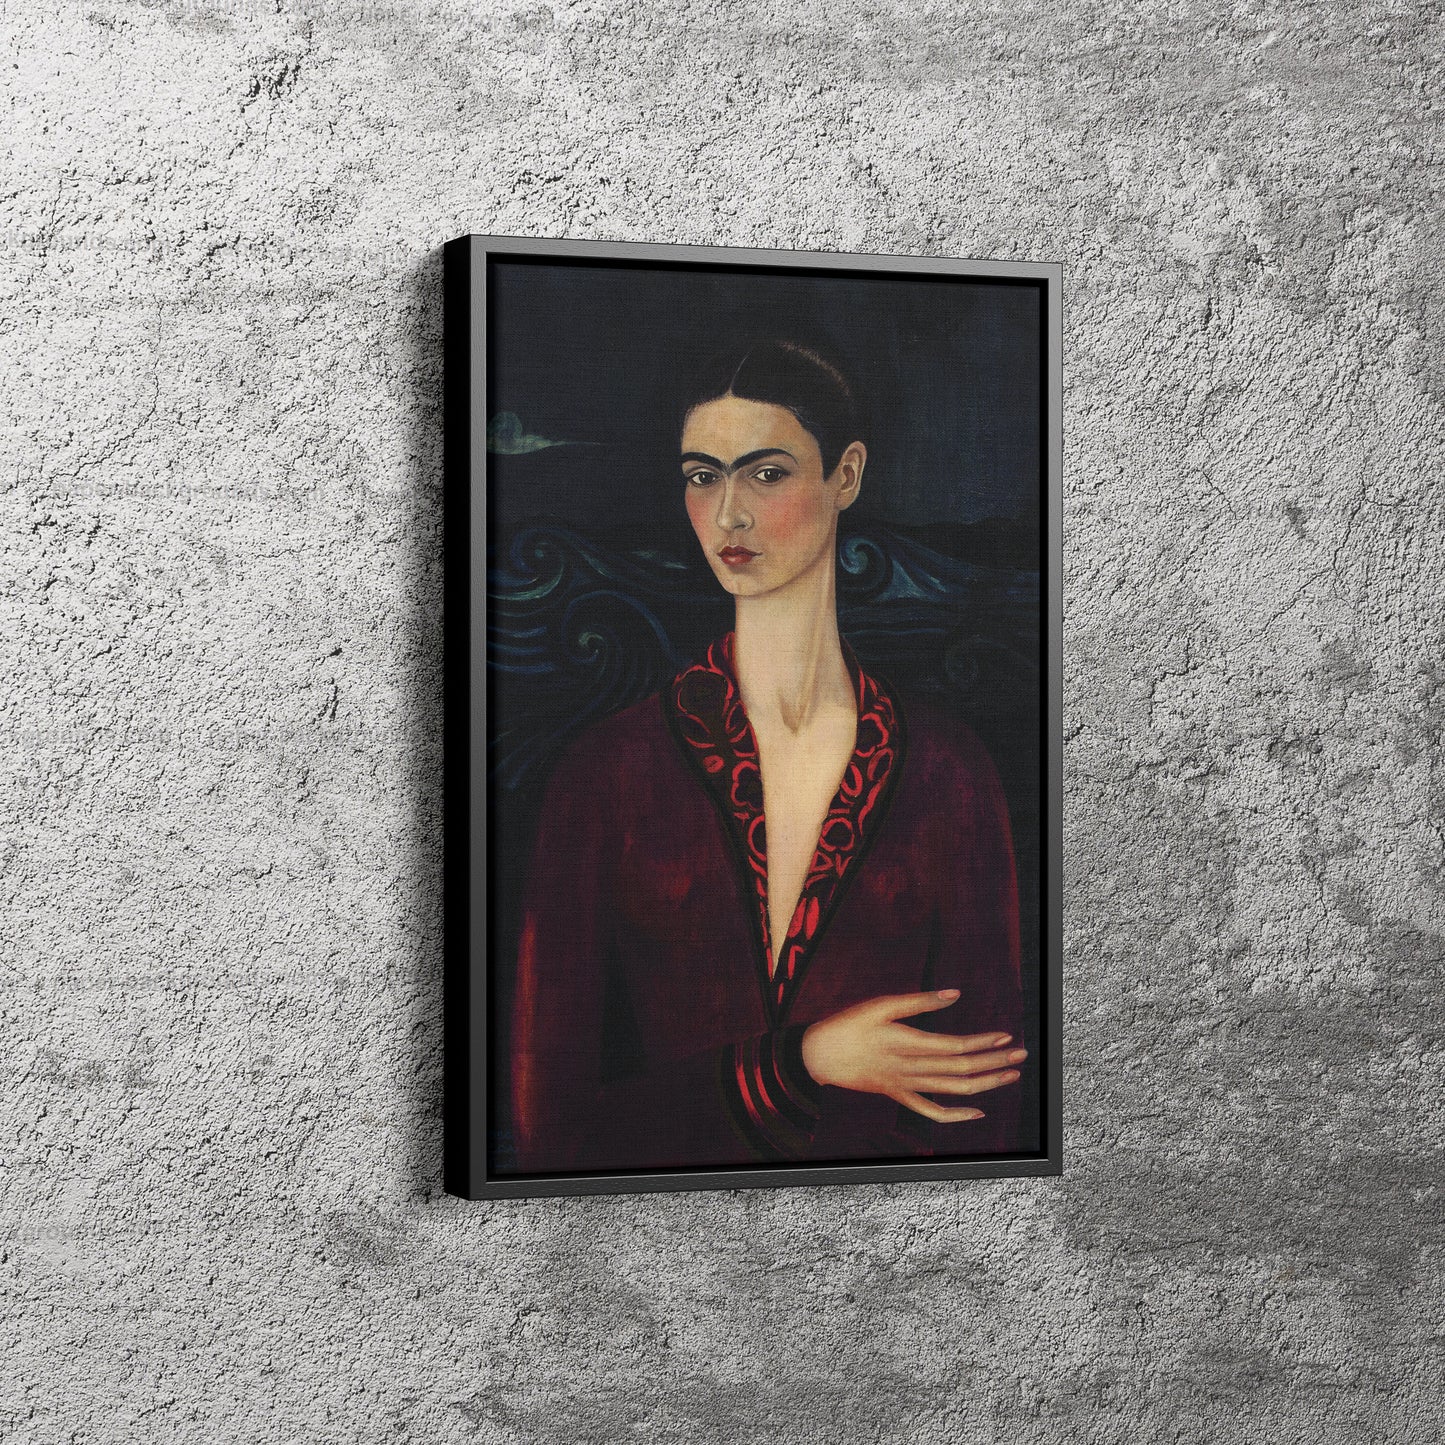 Frida Kahlo Poster with Red Dress Canvas Wall Art Home Decor Framed Art